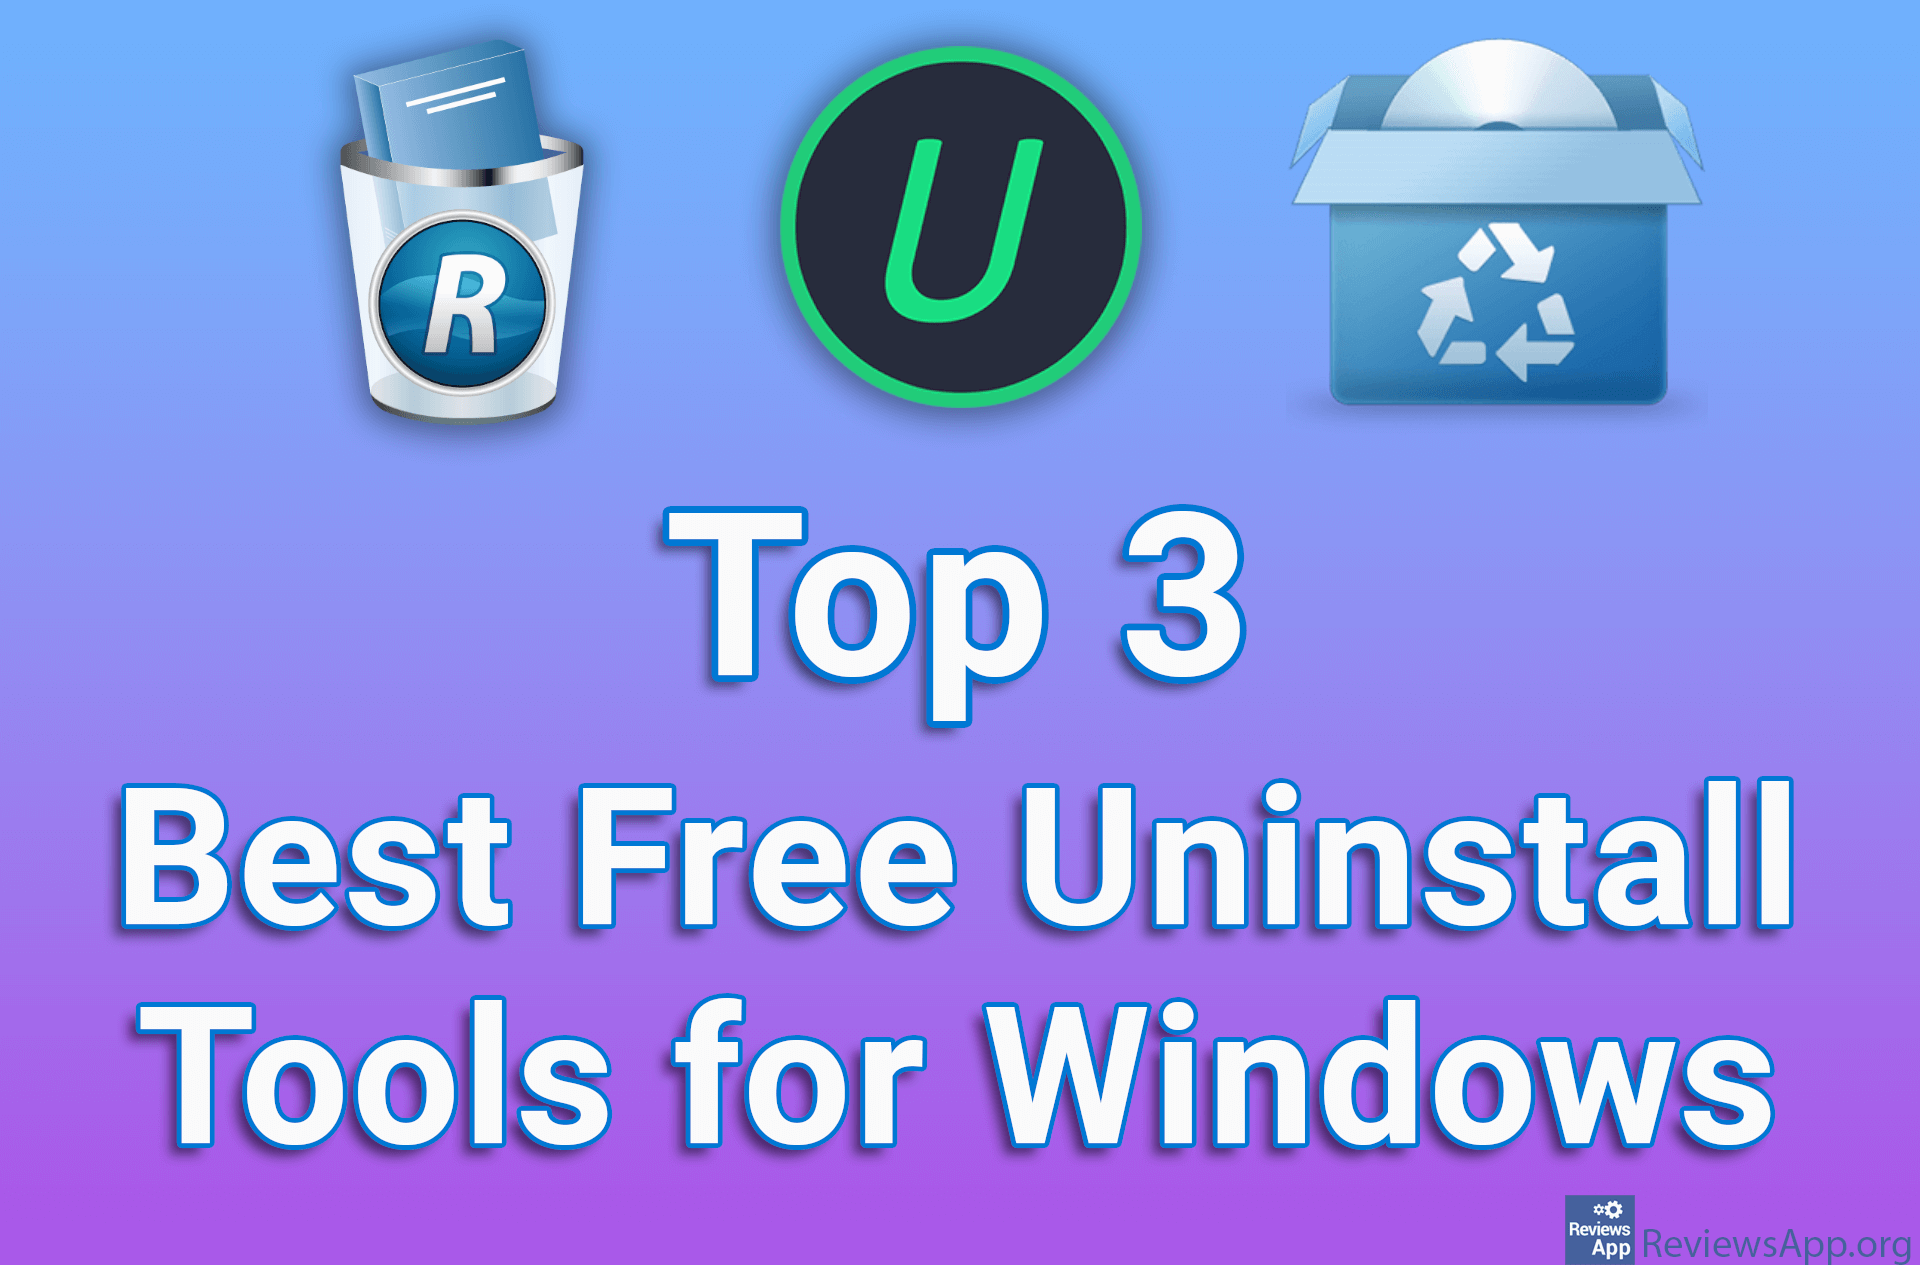 Top 3 Best Free Uninstall Tools for Windows